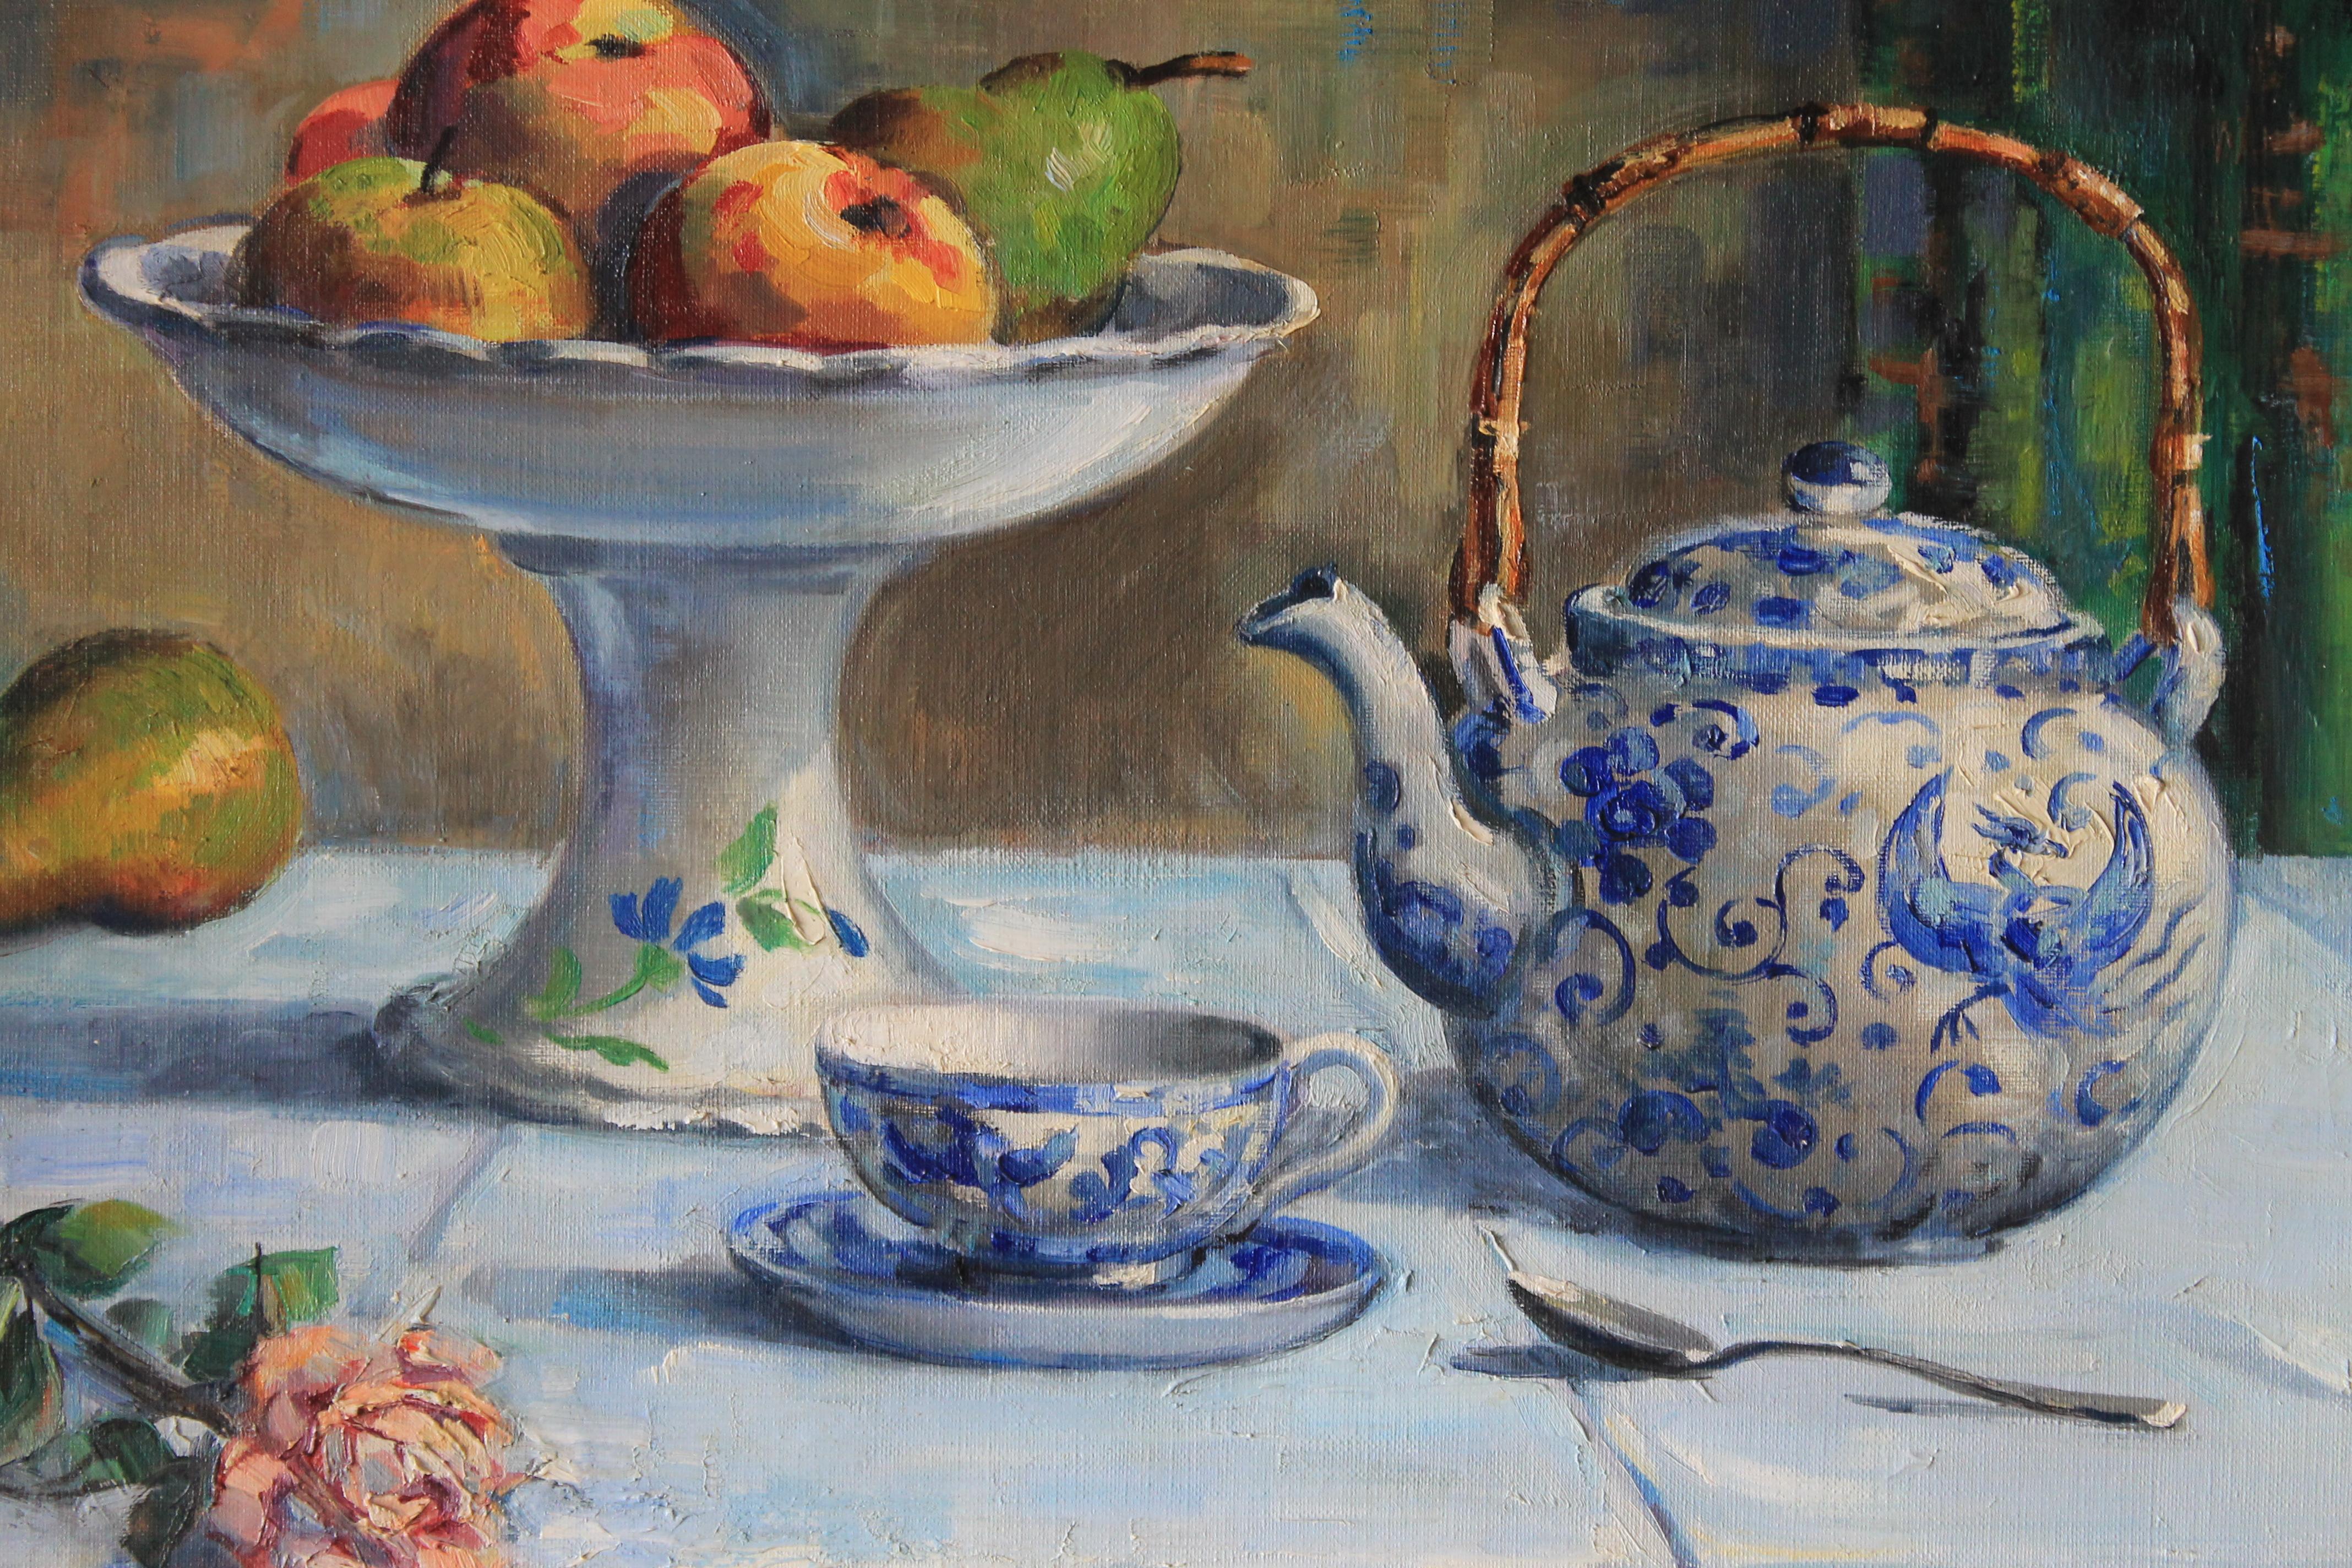 Eye catching still life of a blue and white porcelain tea pot with a bamboo handle, cup and saucer to match, fruit bowl and pear, not forgetting a pretty pink rose, signed in the lower left corner.  This eclectic oil on canvas is busy and